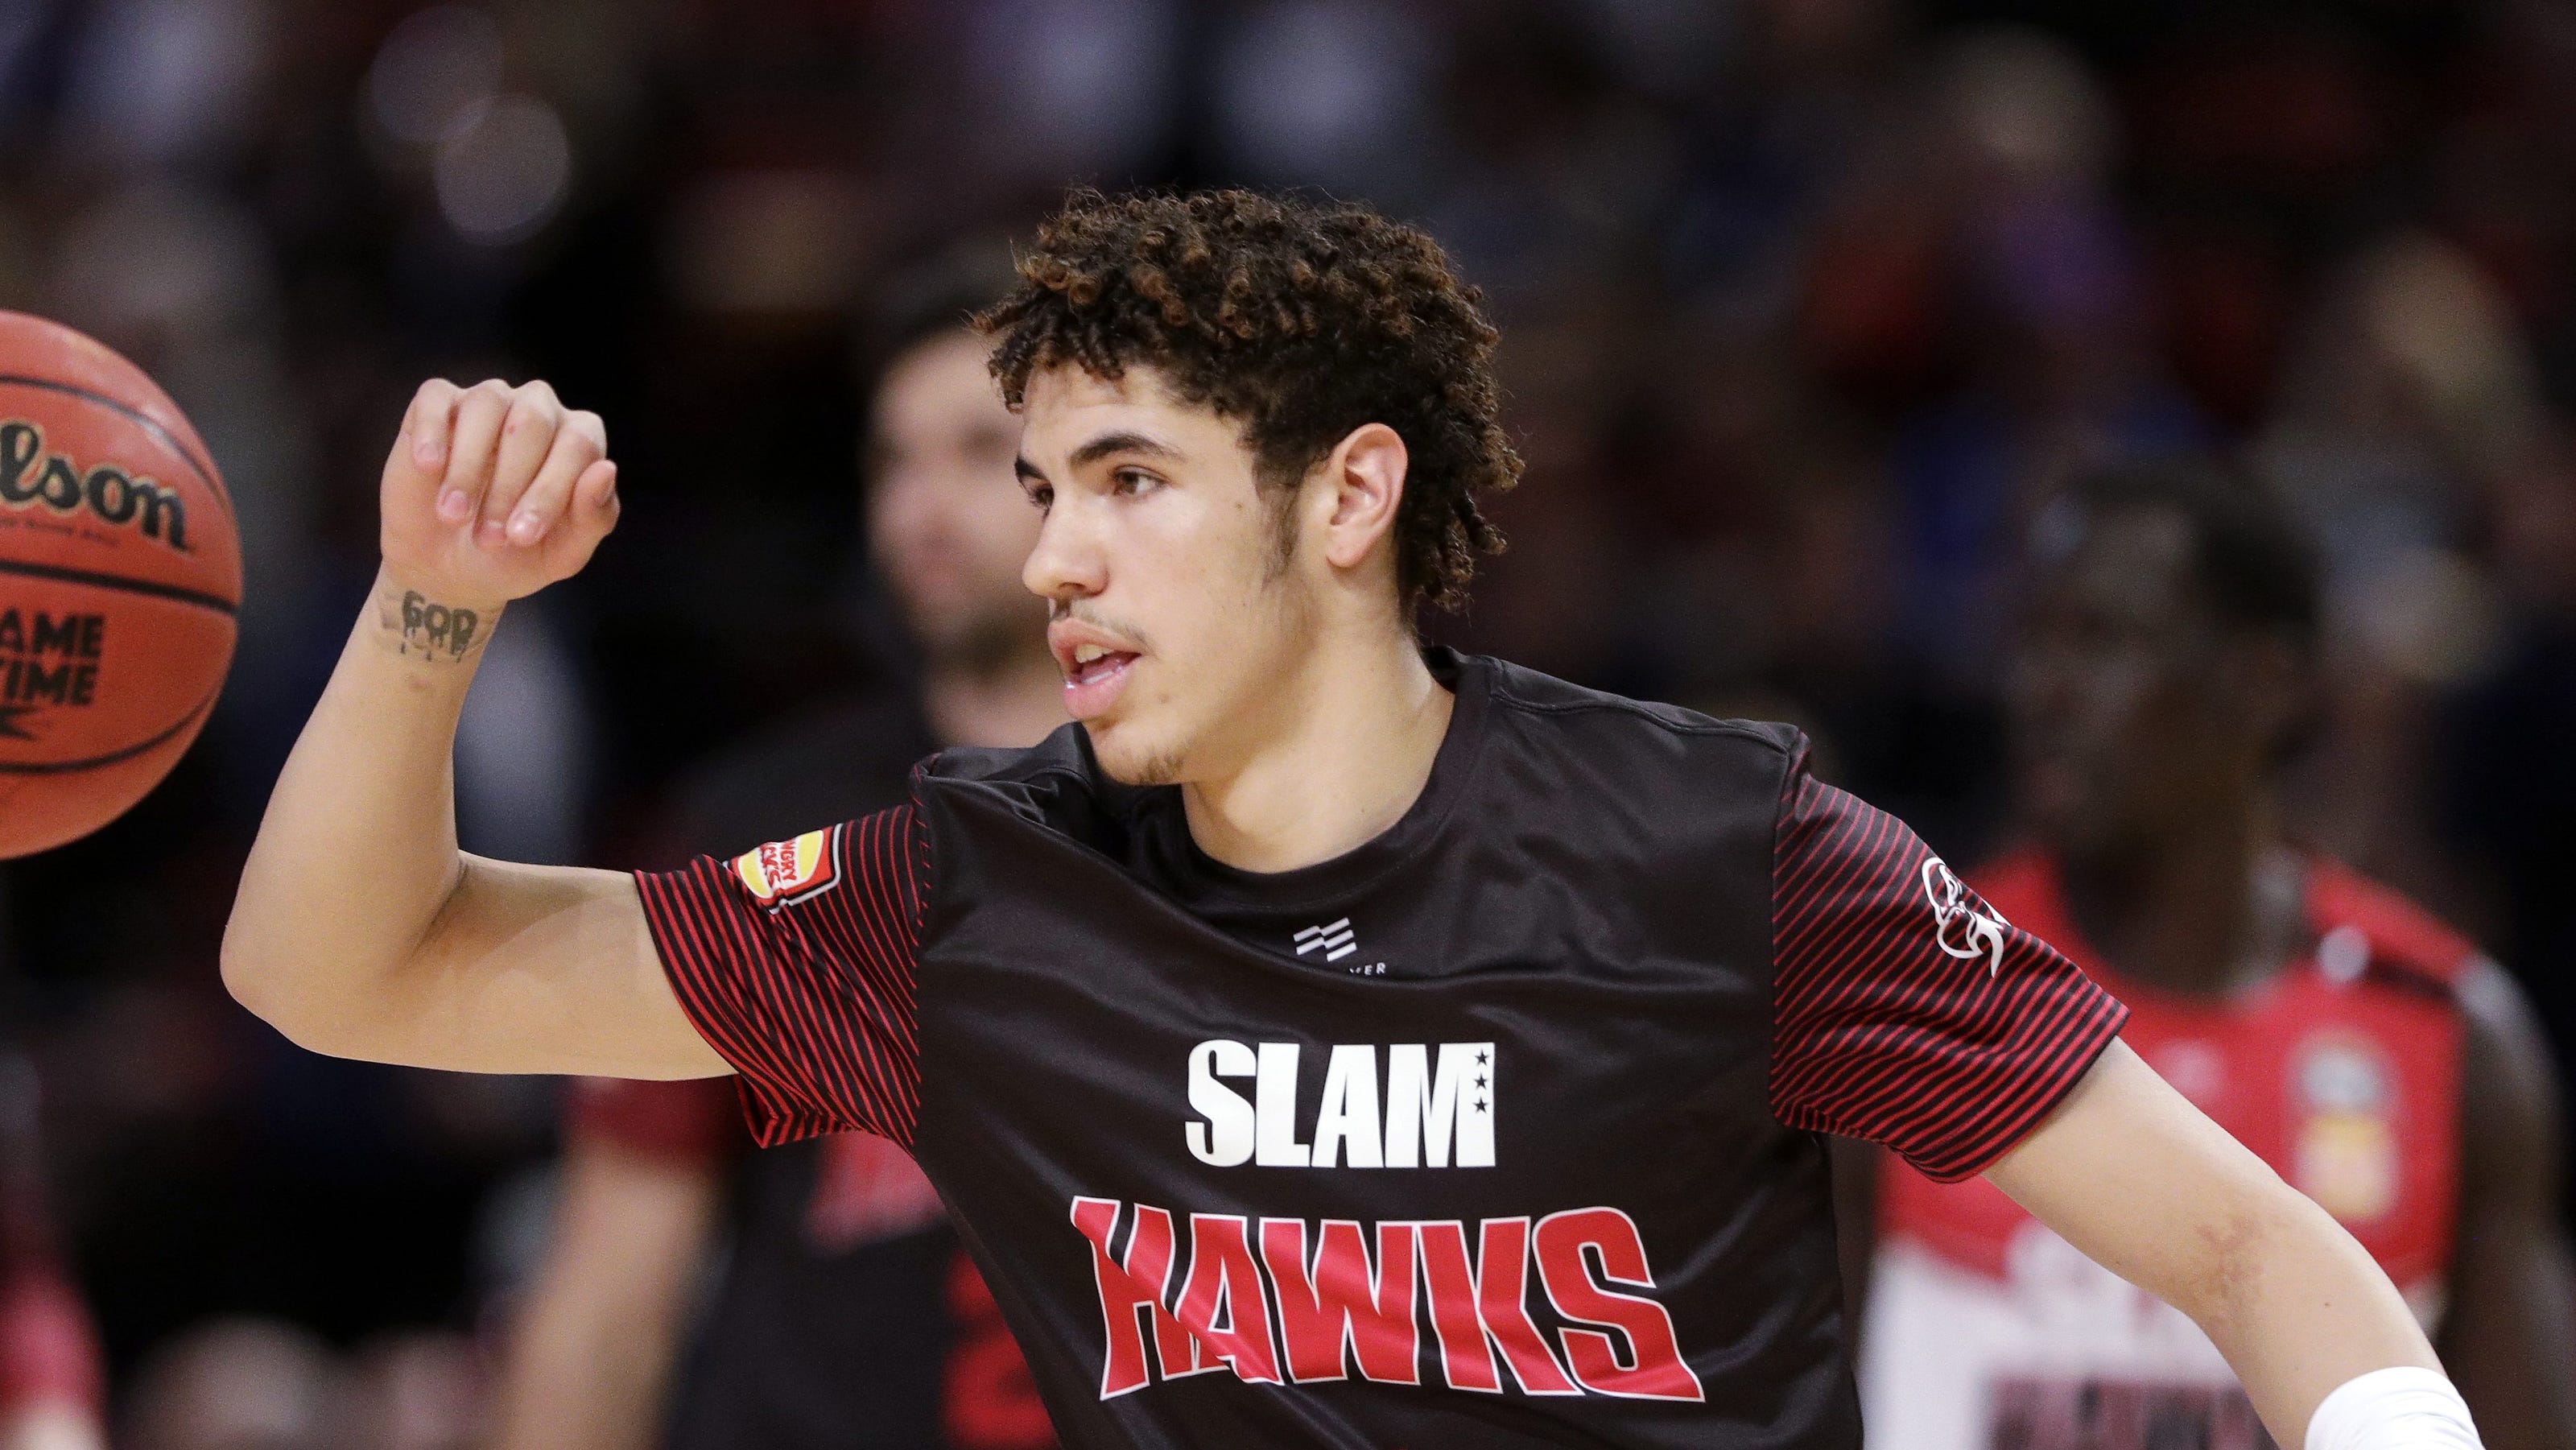 NBA mock draft: LaMelo Ball could end up as the No. 1 pick